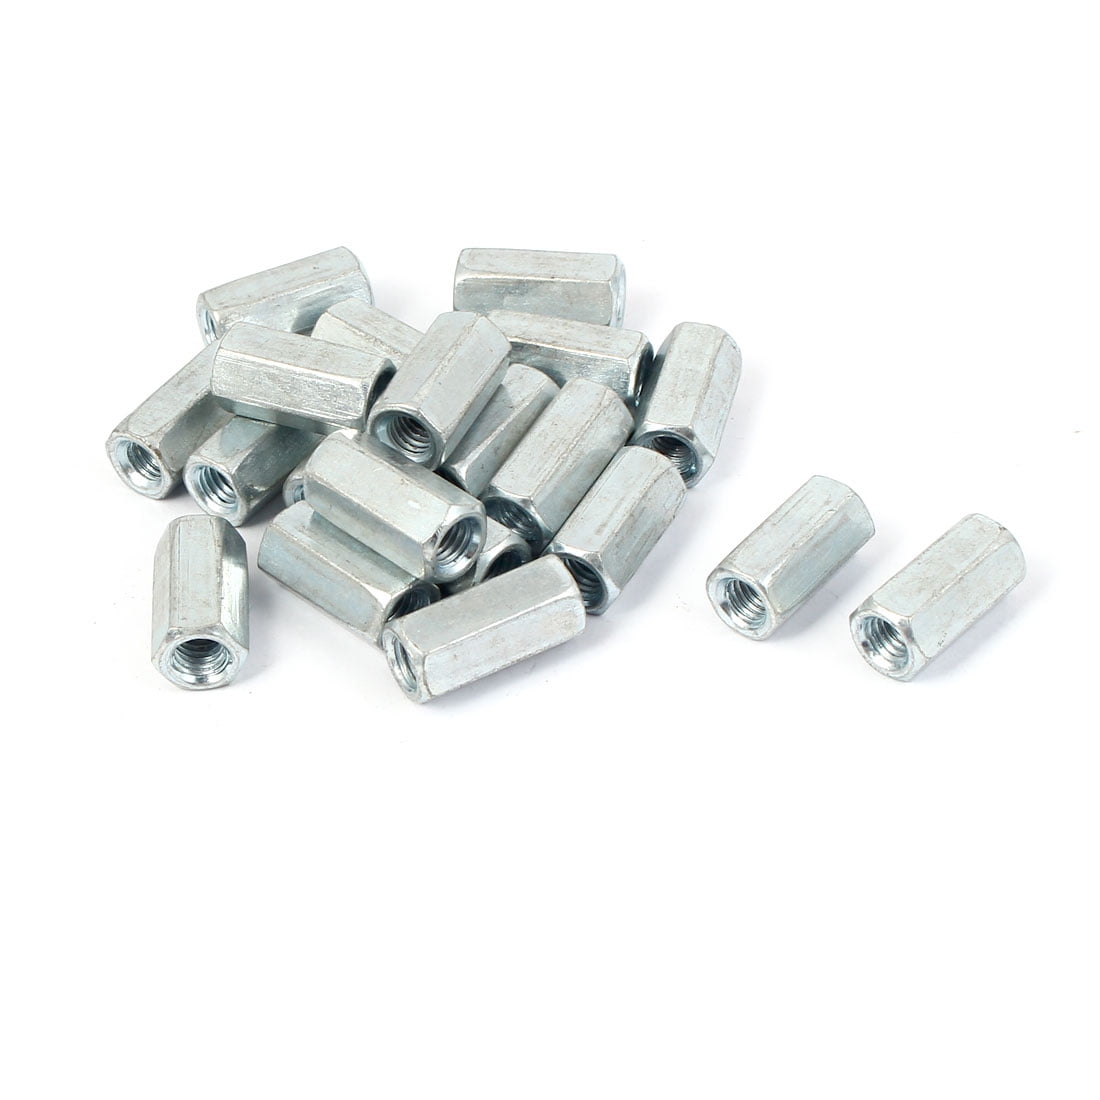 Threaded Rod UNF 5/16-24 X 7/16 x 1 Qty 1 Stainless Steel Coupling Nuts 